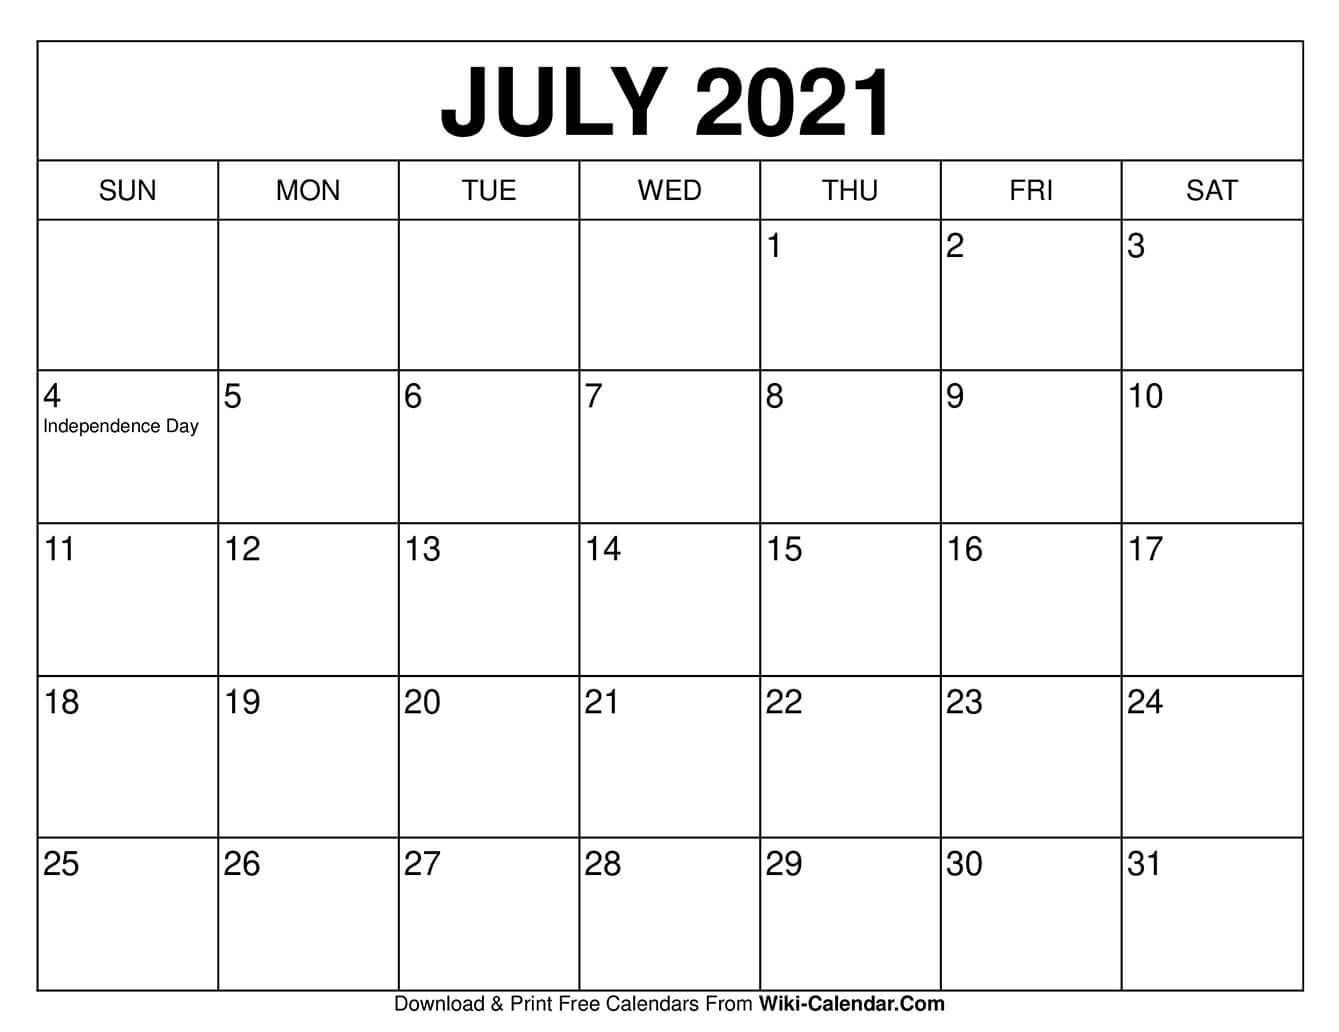 July 2021 Calendar Wallpapers - Wallpaper Cave-Free Two Page August 2021 Month